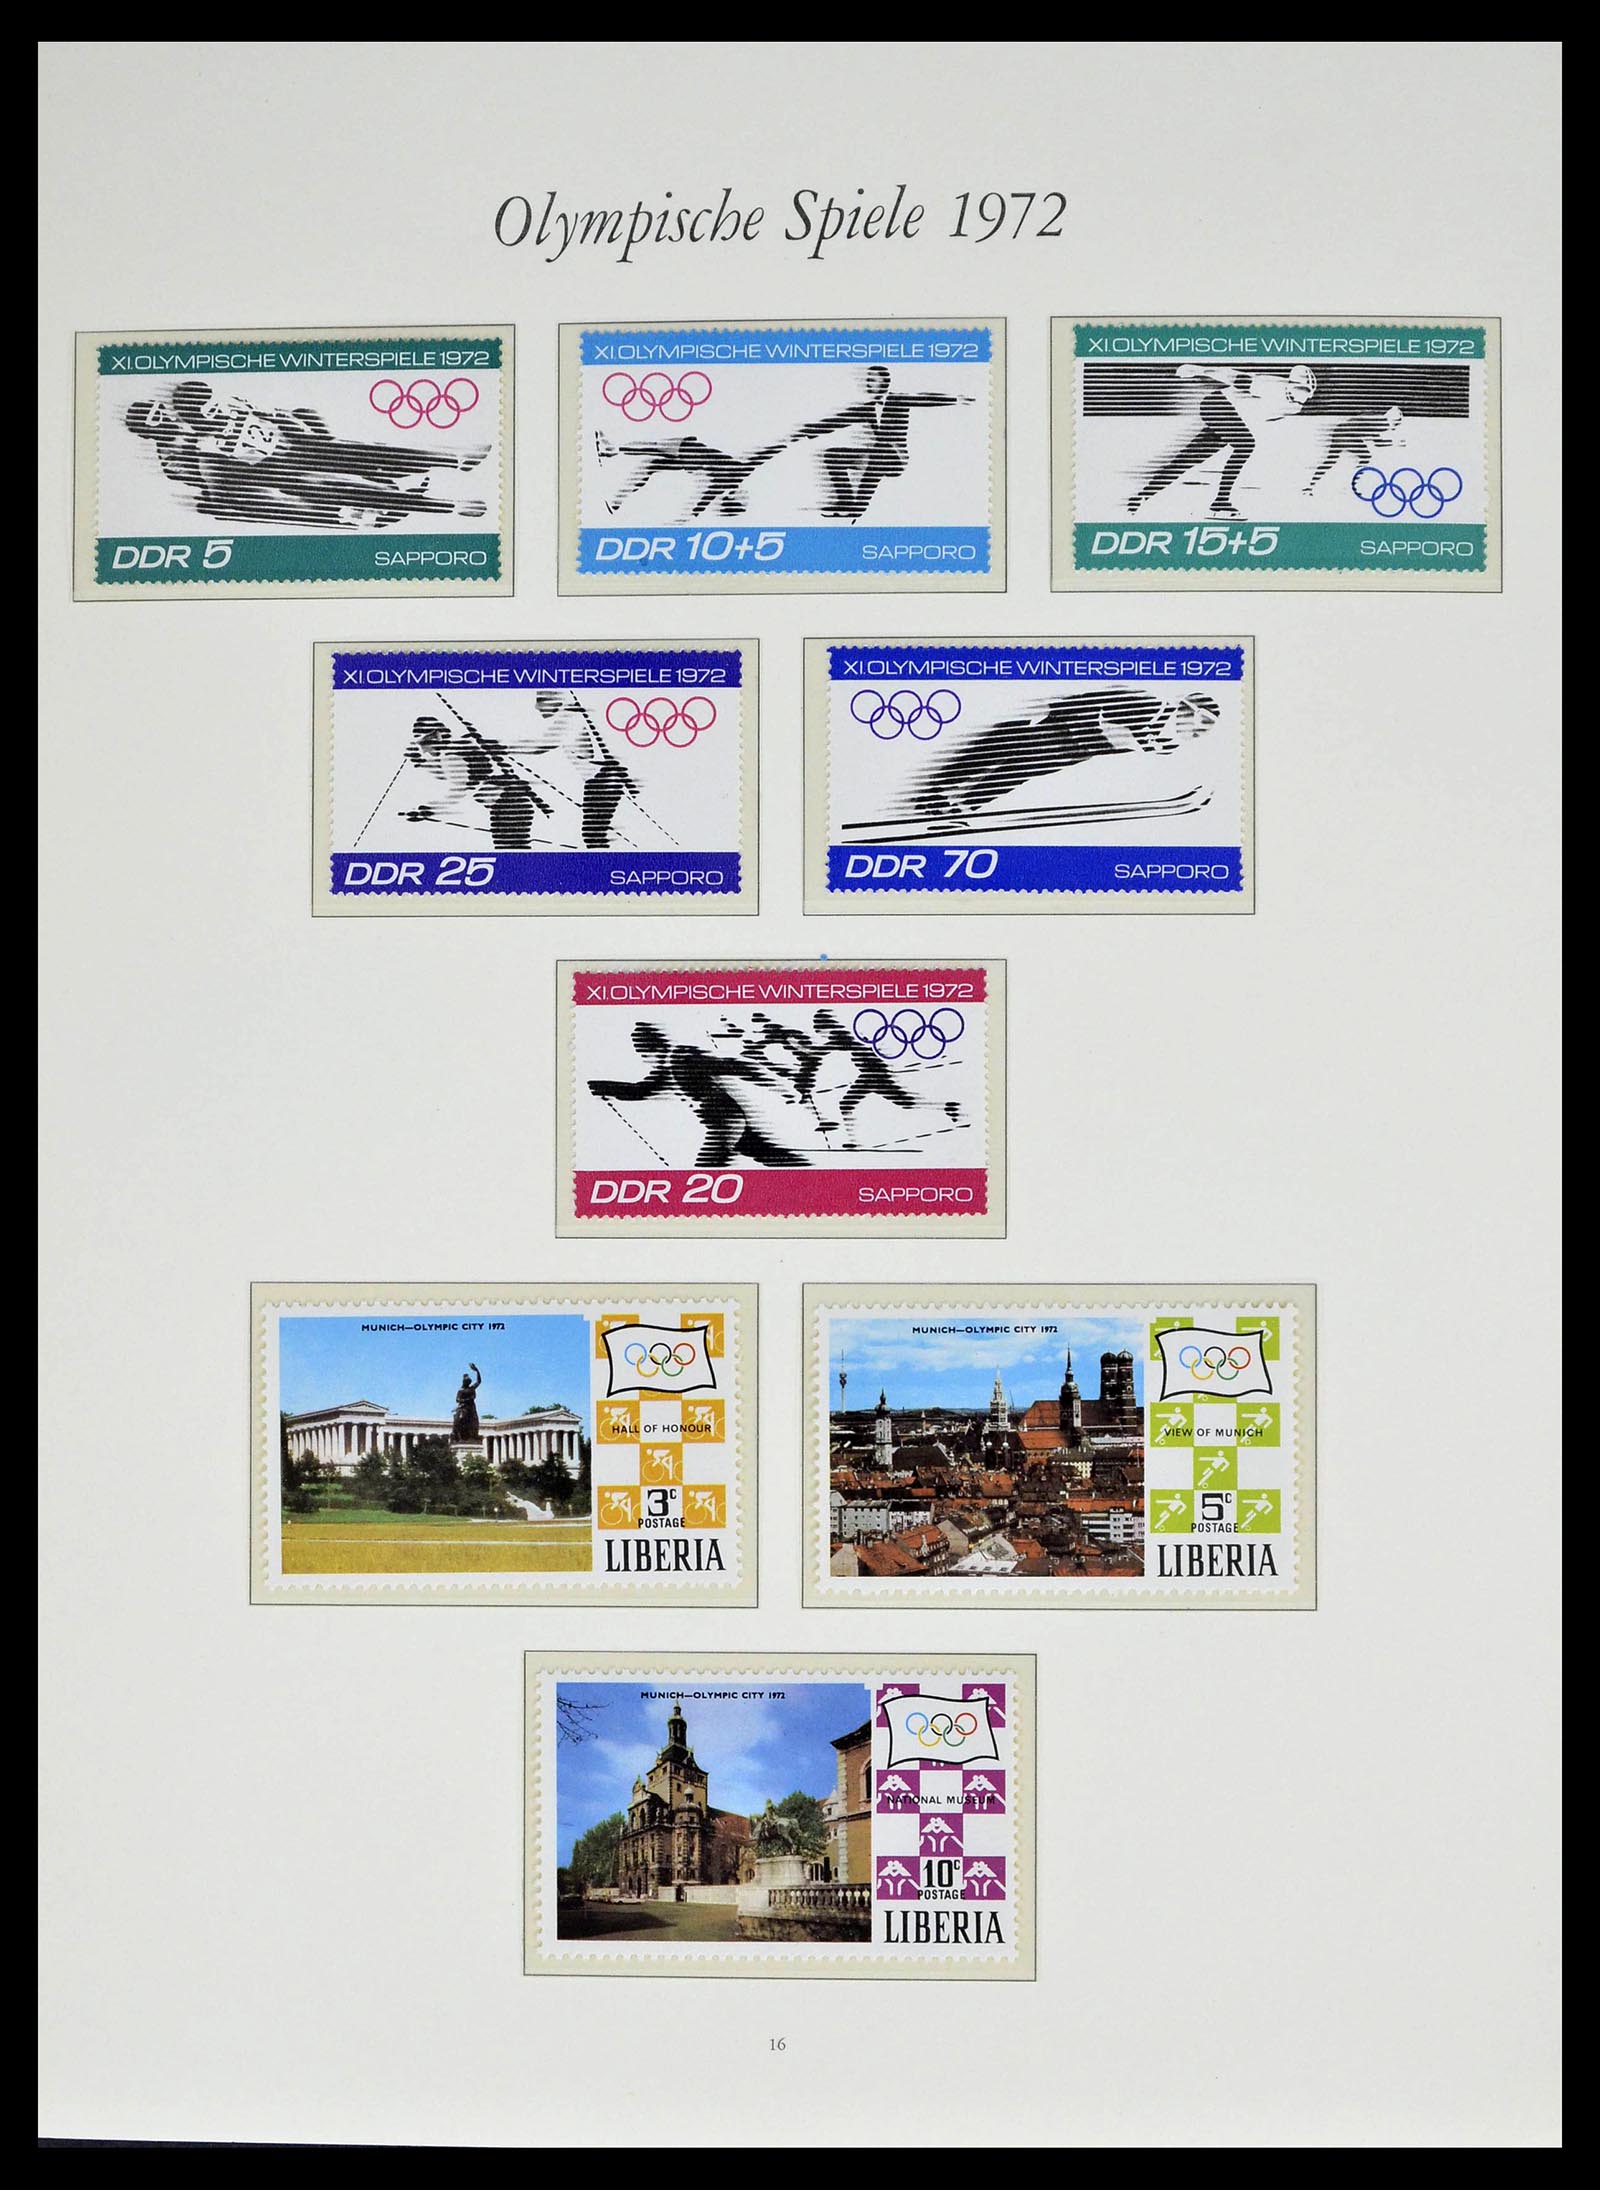 39237 0076 - Stamp collection 39237 Olympics 1972.